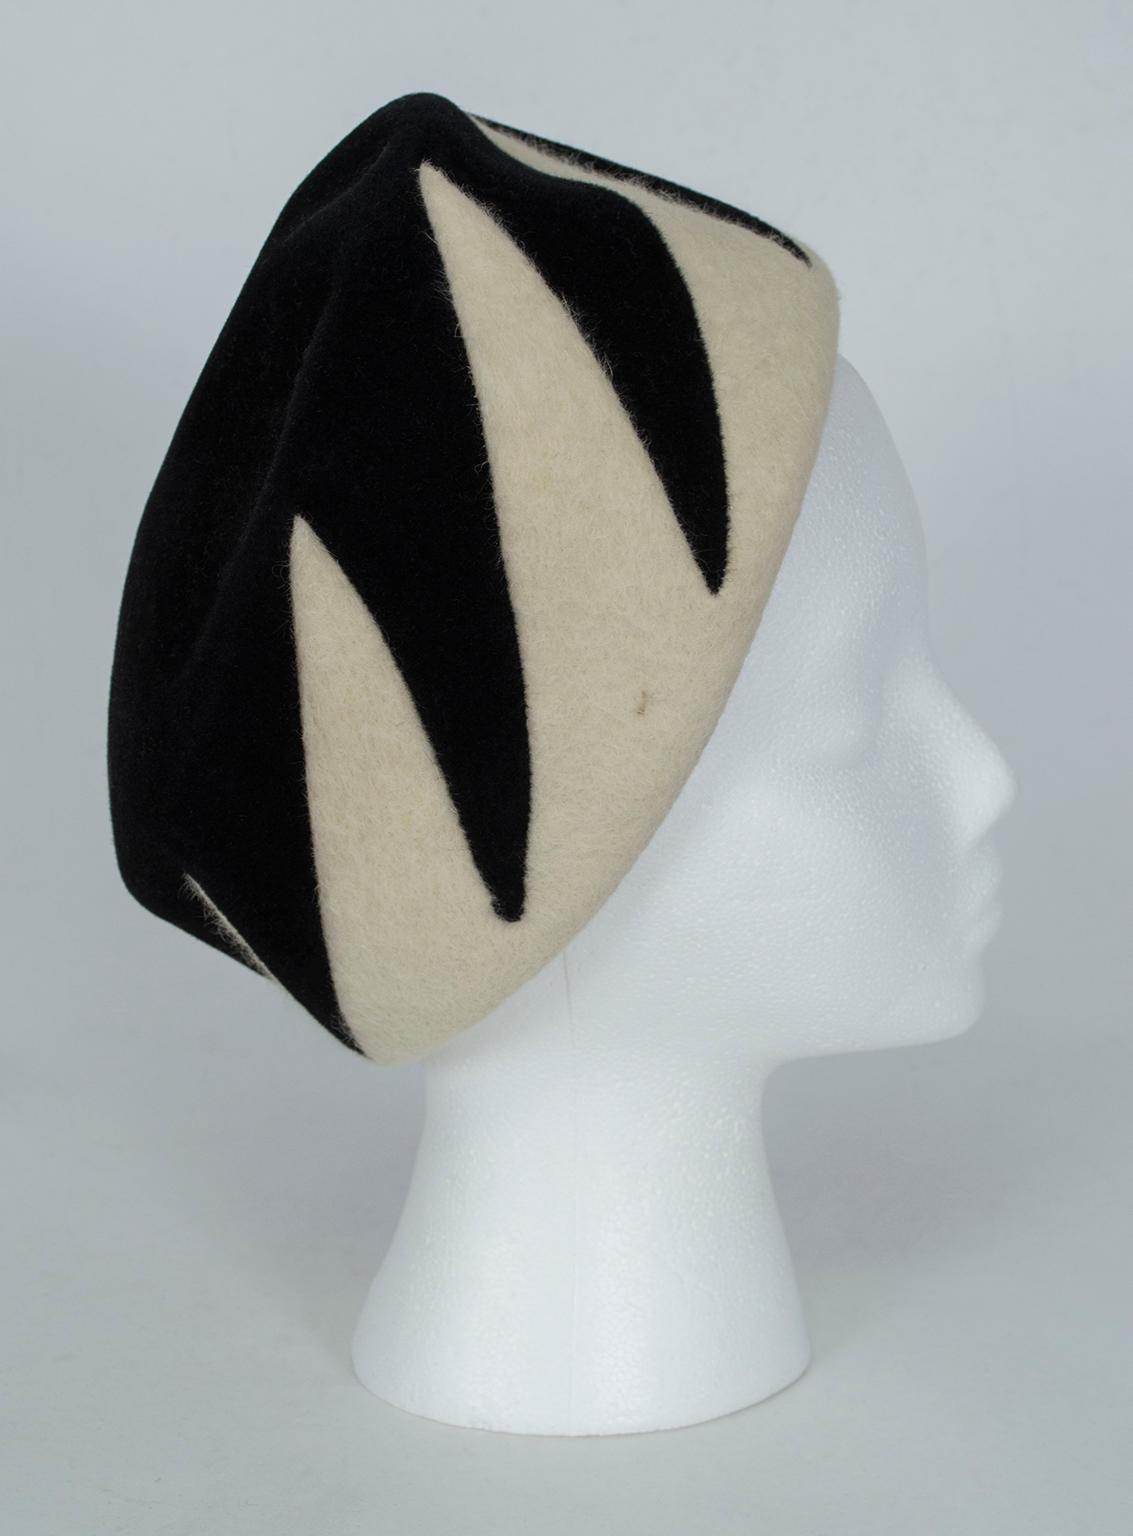 With enough boldness to silence a room and a neutral, pair-with-anything color palette, its existence is reason enough to start wearing hats again. Isabella Blow would approve.

Round pillbox turban of black doeskin and ivory felted wool; ivory